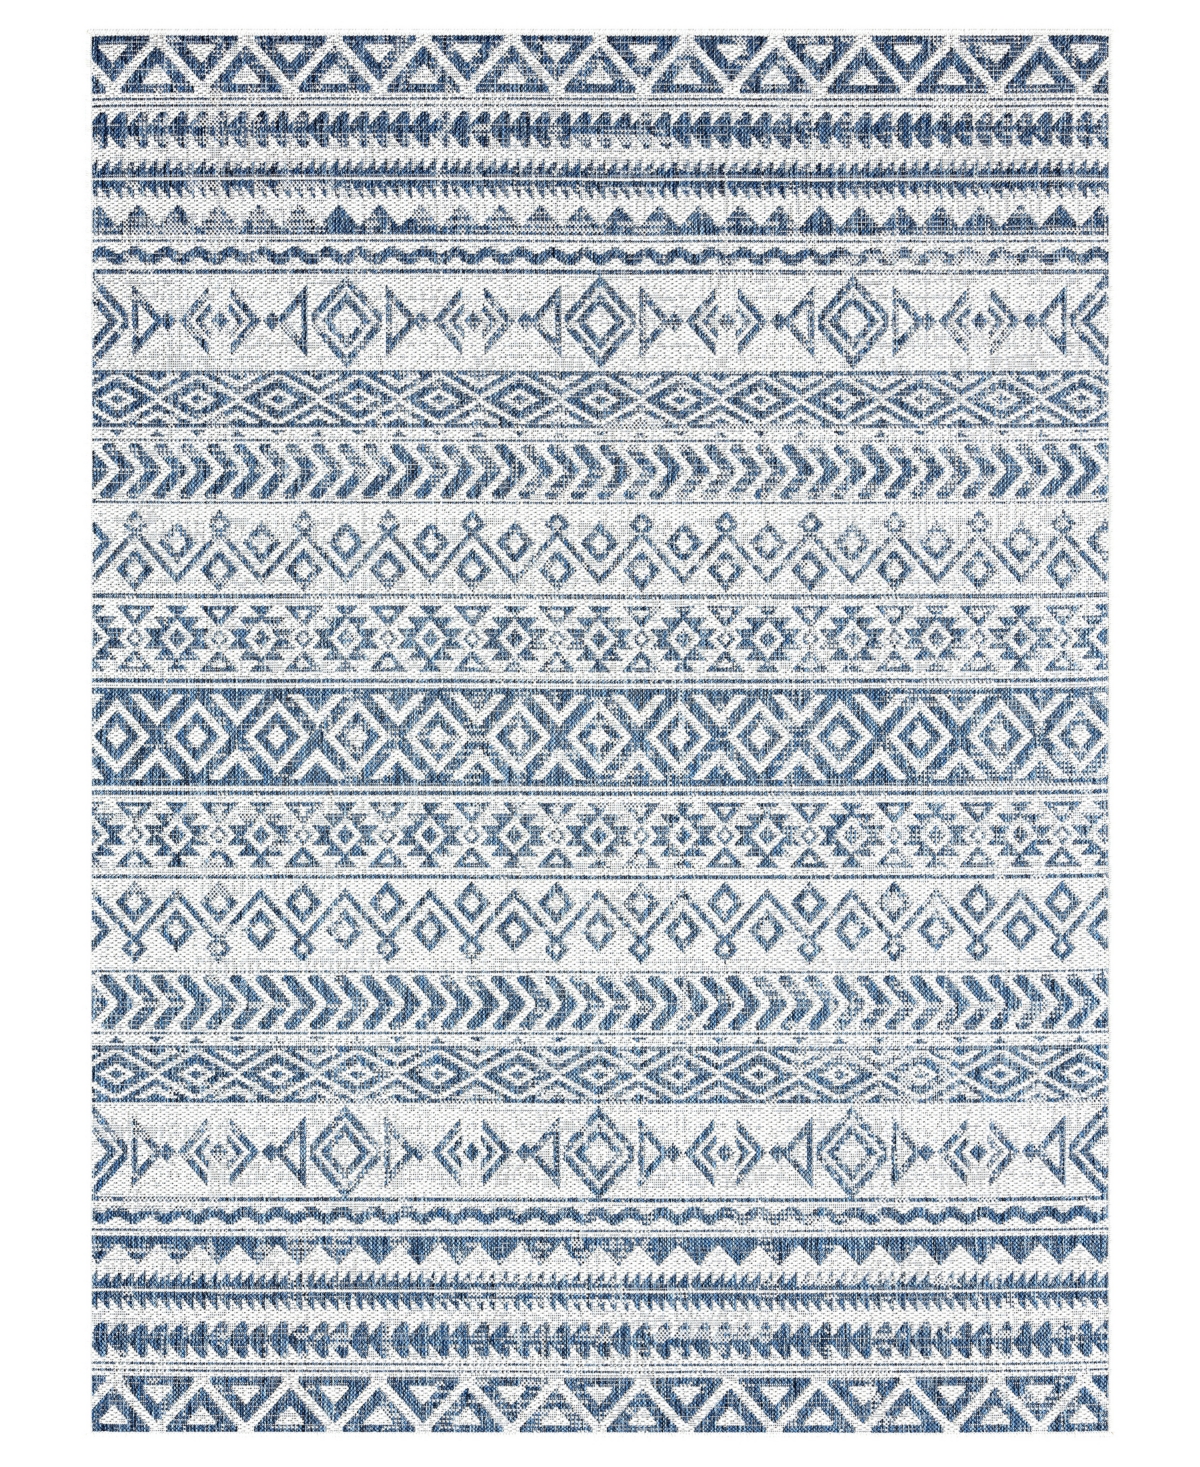 Nicole Miller Patio Country Odina 7'9" X 10'2" Area Rug In Navy